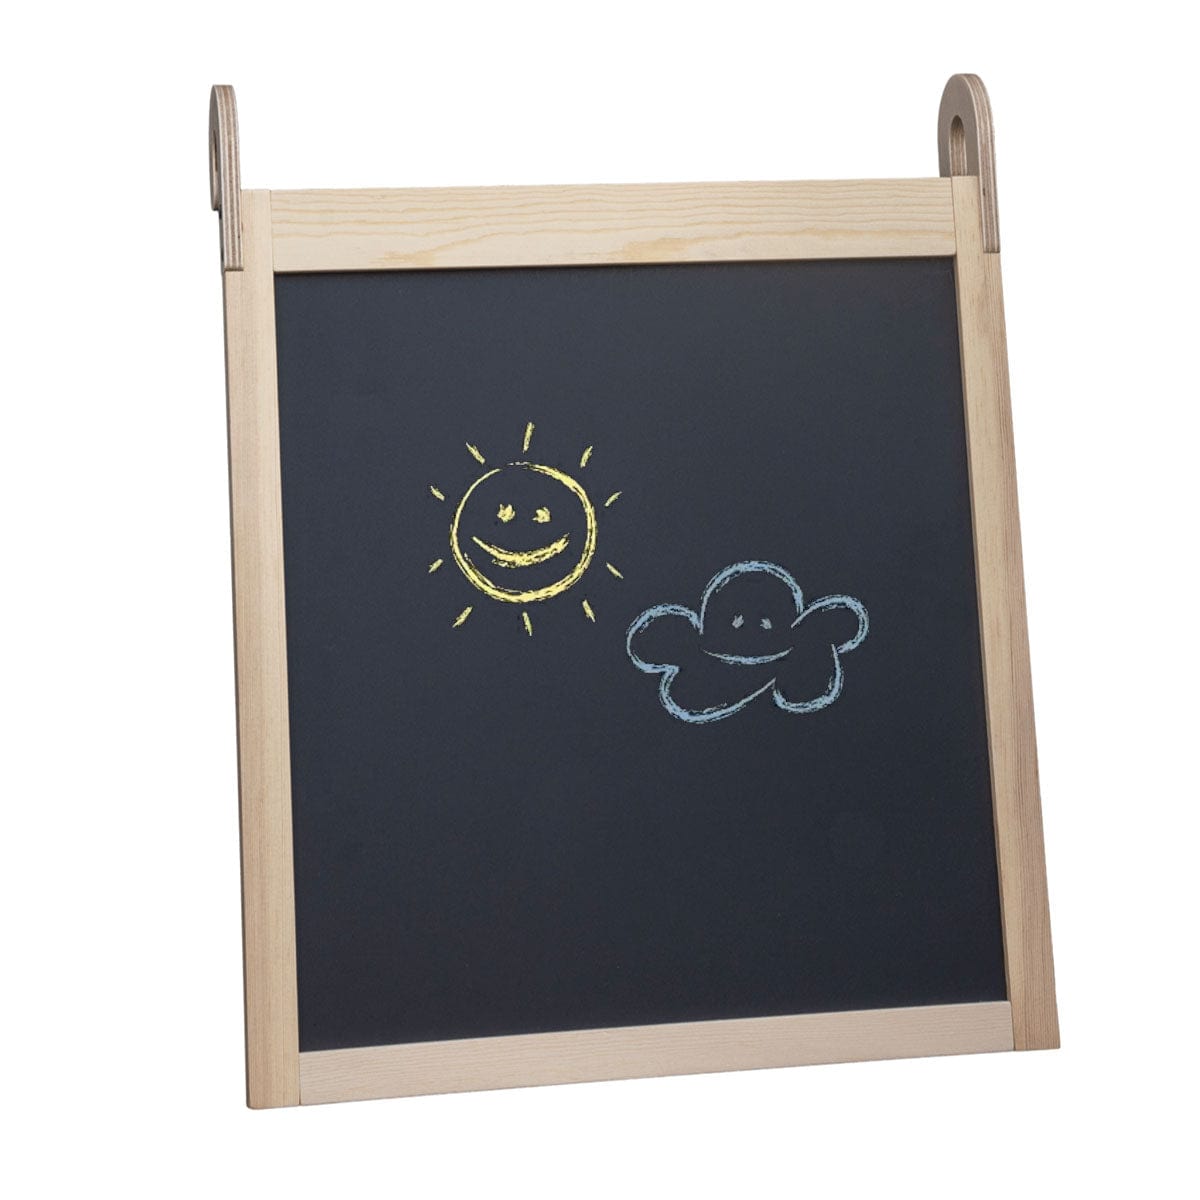 JALA Deluxe Dual-Sided Magnetic Whiteboard and Chalkboard - Natural